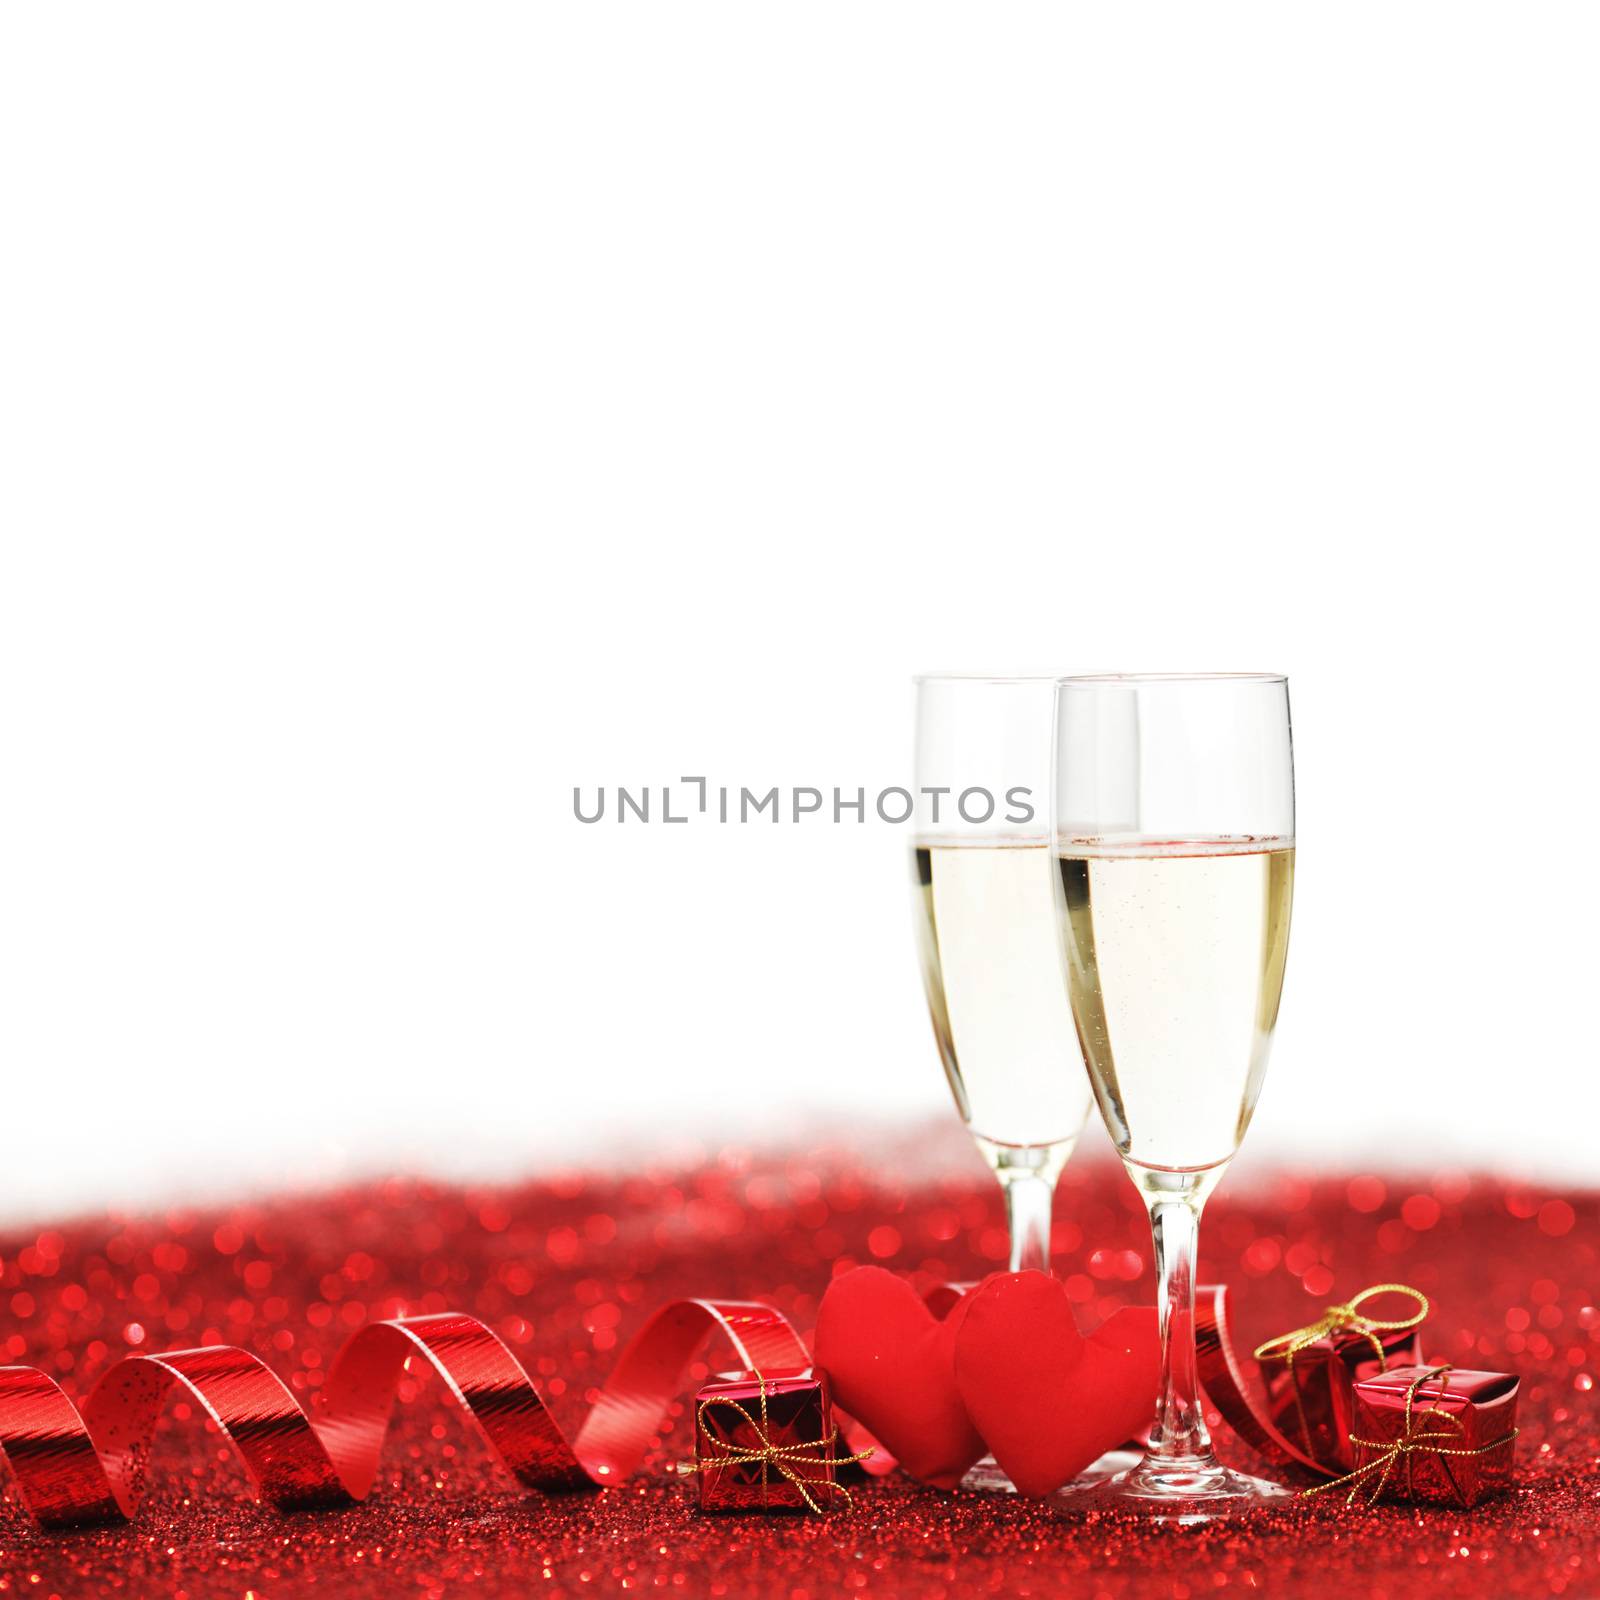 Glasses with Champagne and handmade hearts on red glitters isolated on white background